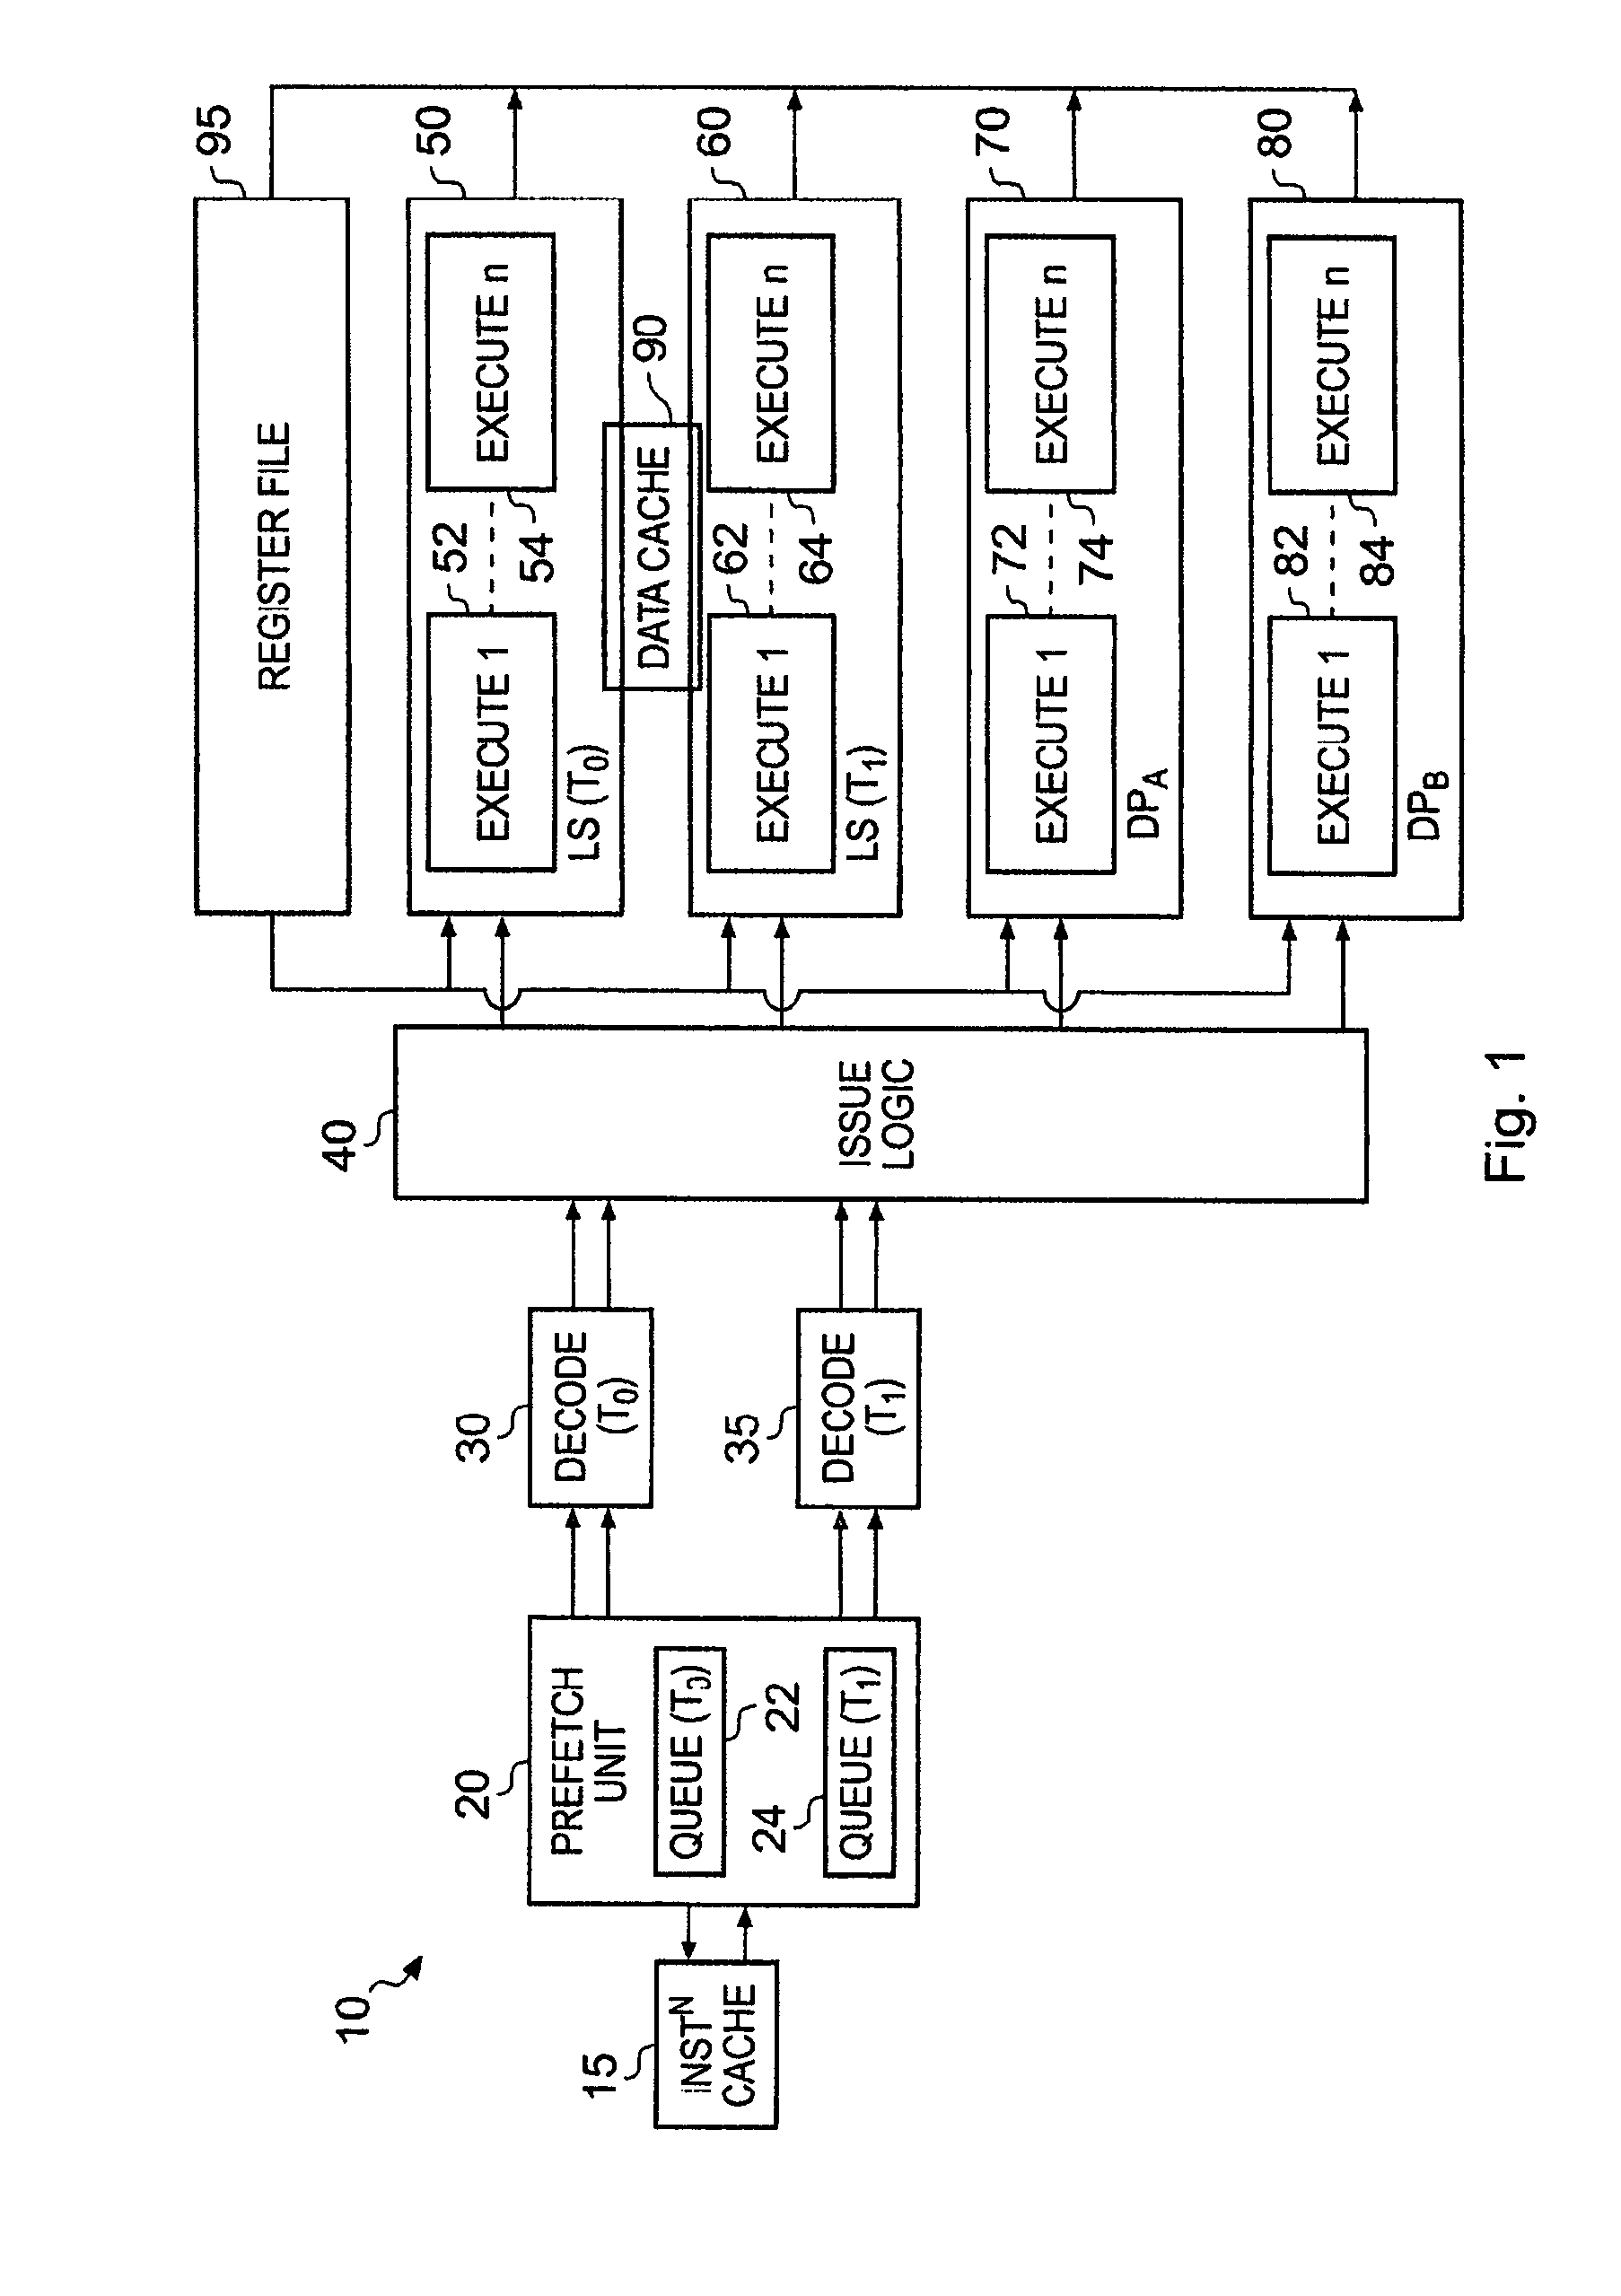 Allocation of memory access operations to memory access capable pipelines in a superscalar data processing apparatus and method having a plurality of execution threads